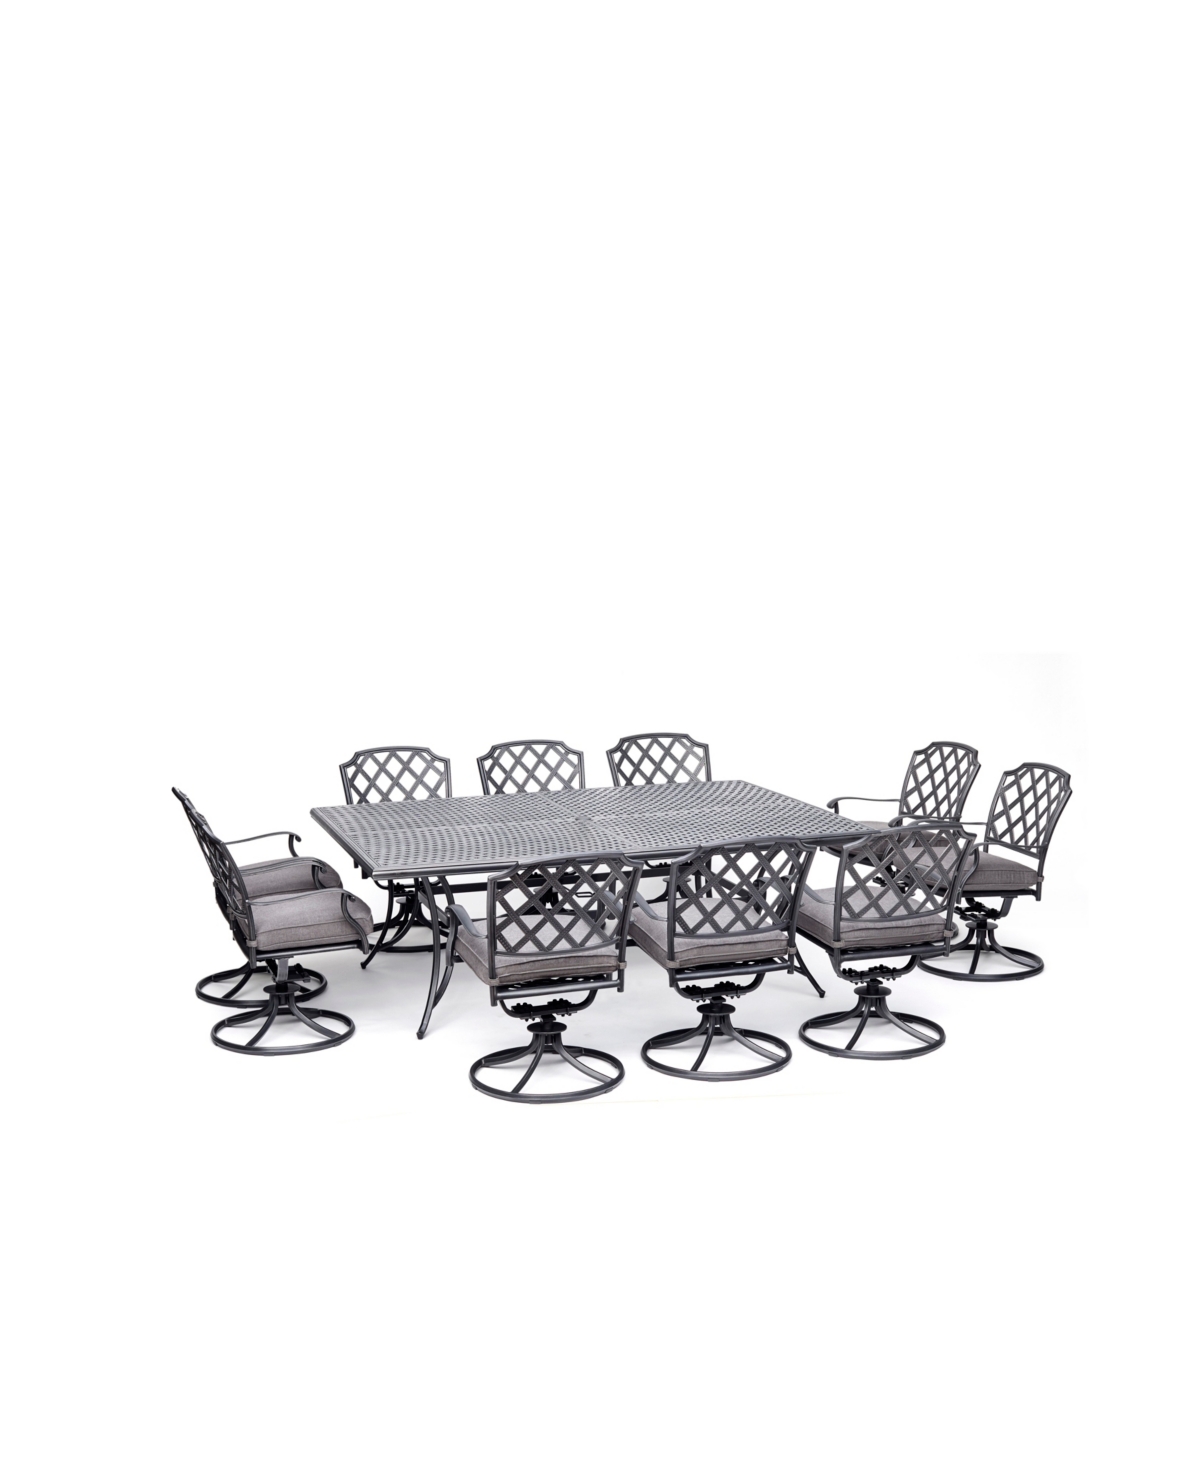 Agio Vintage Ii Outdoor 11-pc. Dining Set (84" X 60" Dining Table & 10 Swivel Rockers), With Outdura Cush In Outdura Remy Graphite